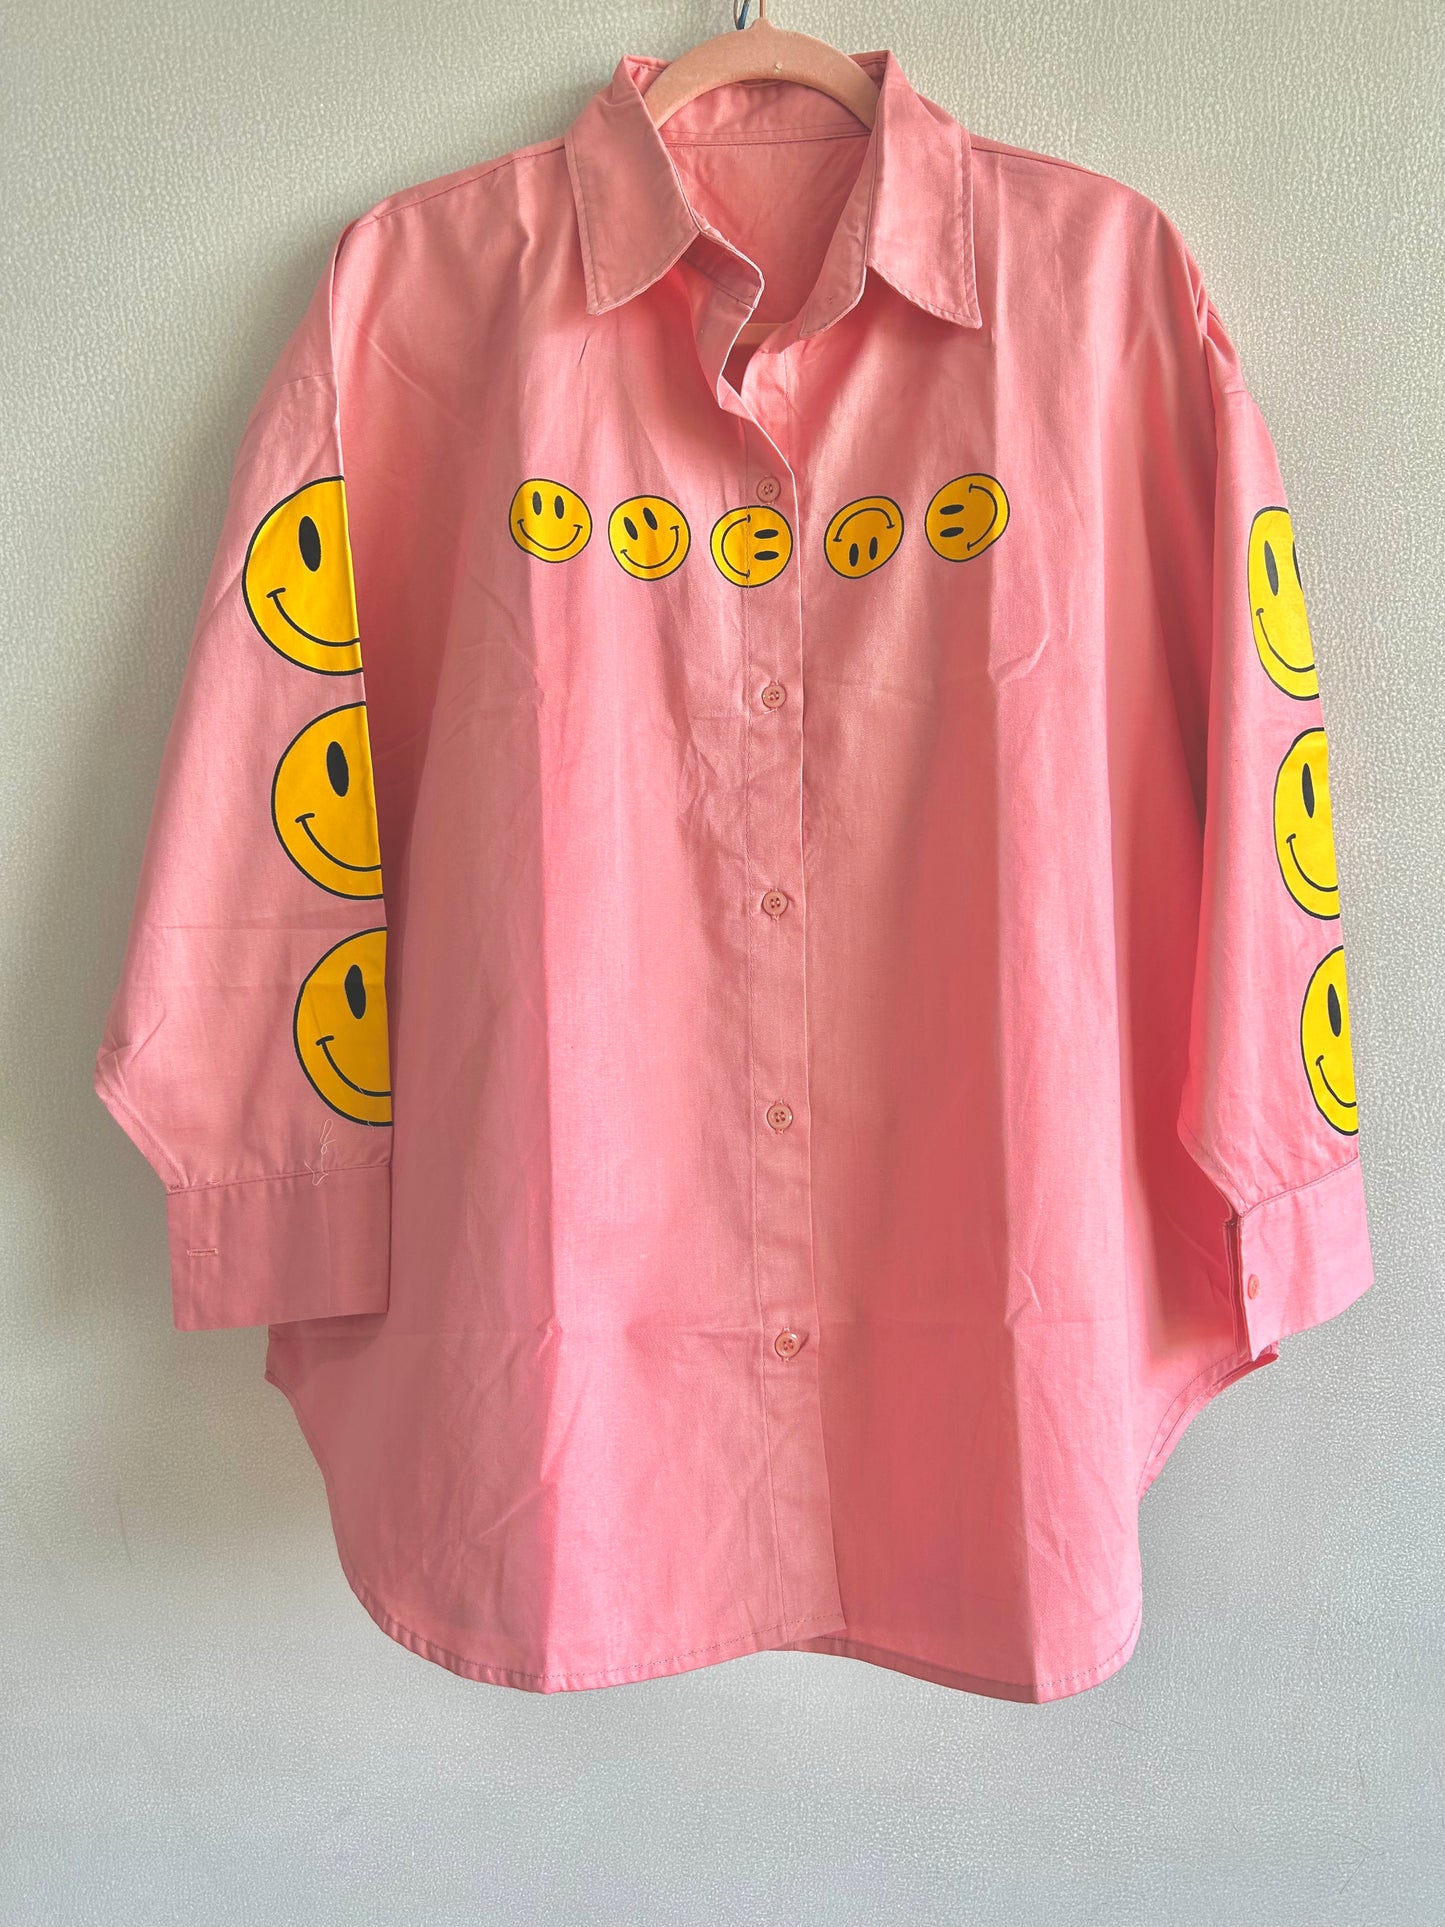 Oversize Style Shirt small smiley PINk